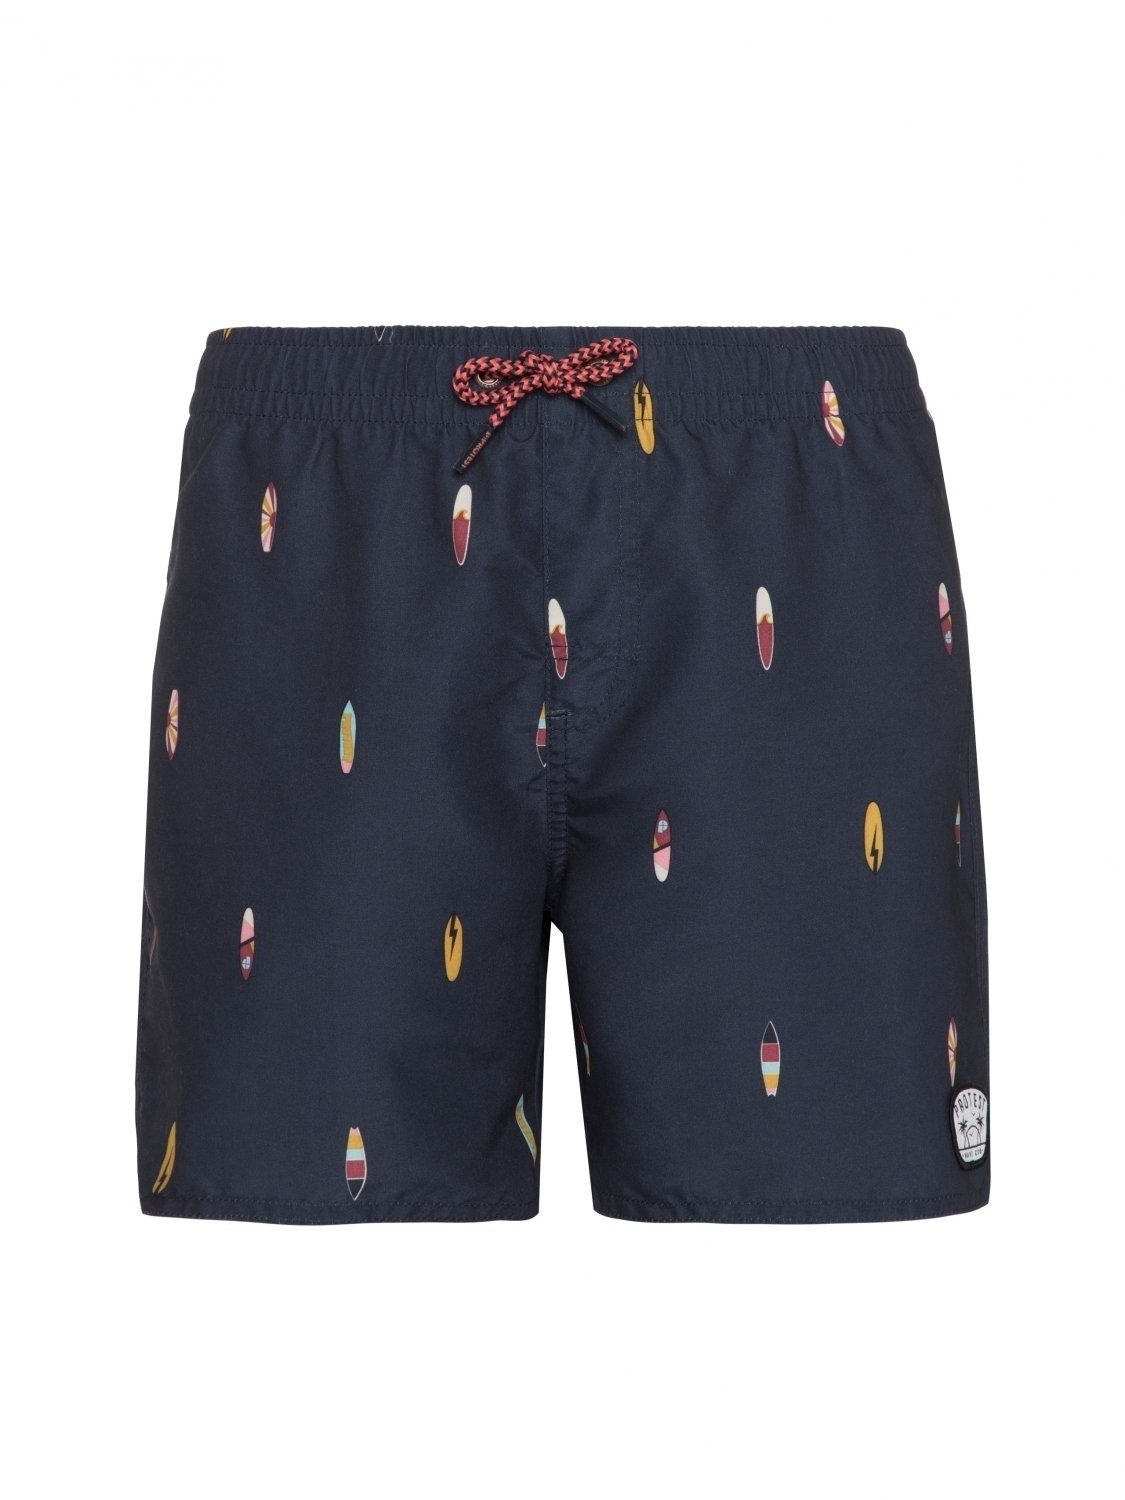 Protest Jungen Badeshorts Protest Badehose Prttyko